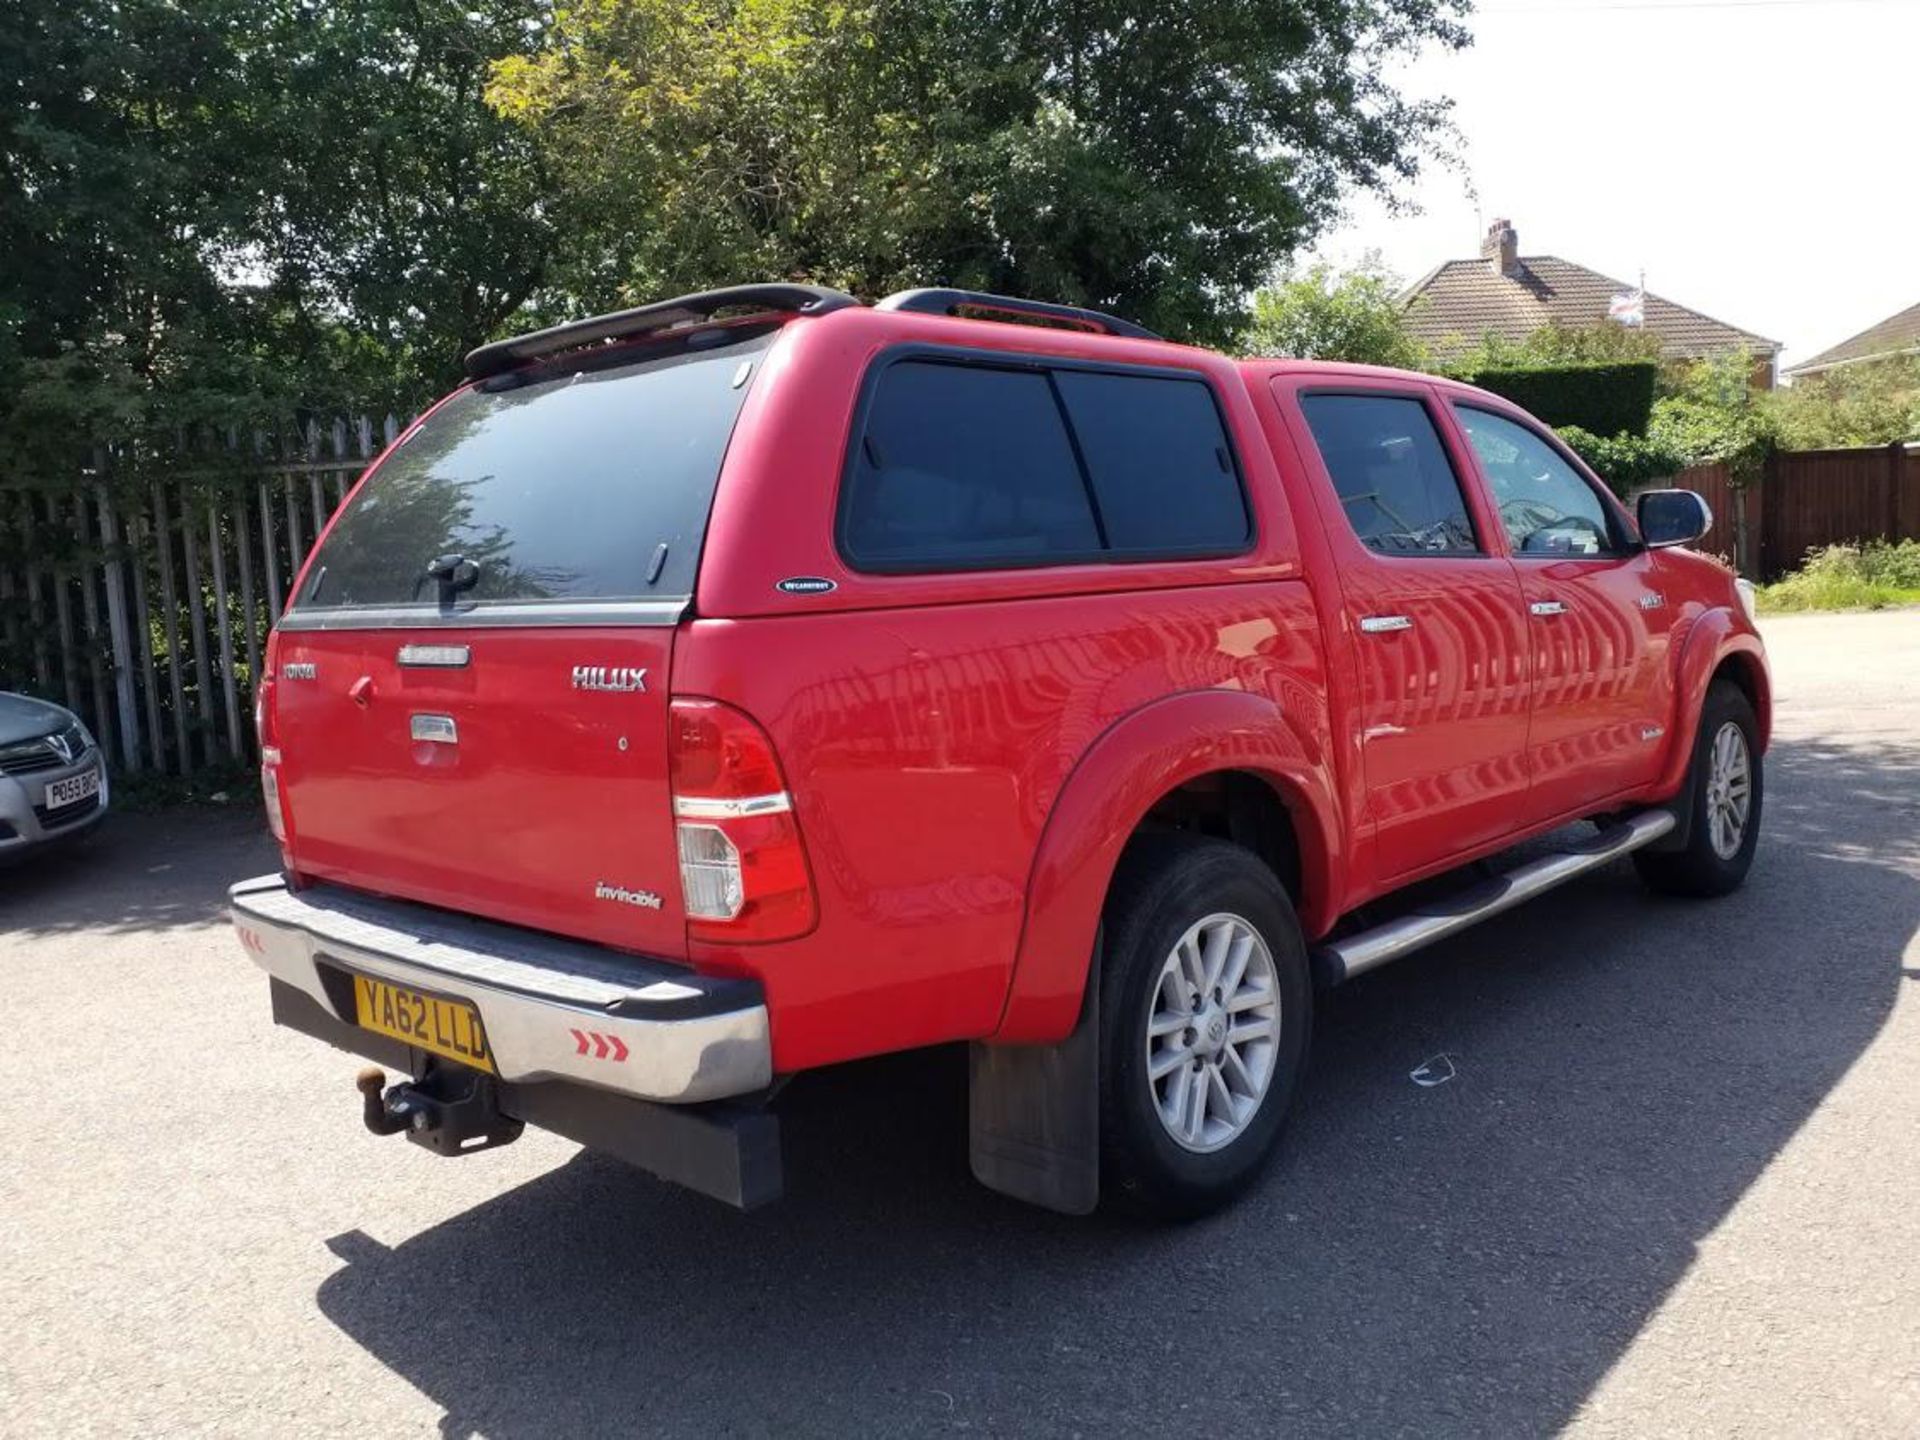 2013/62 REG TOYOTA HILUX INVINCIBLE D-4D 4X4 RED 3.0 AUTO, SHOWING 0 FORMER KEEPERS *PLUS VAT* - Image 3 of 8